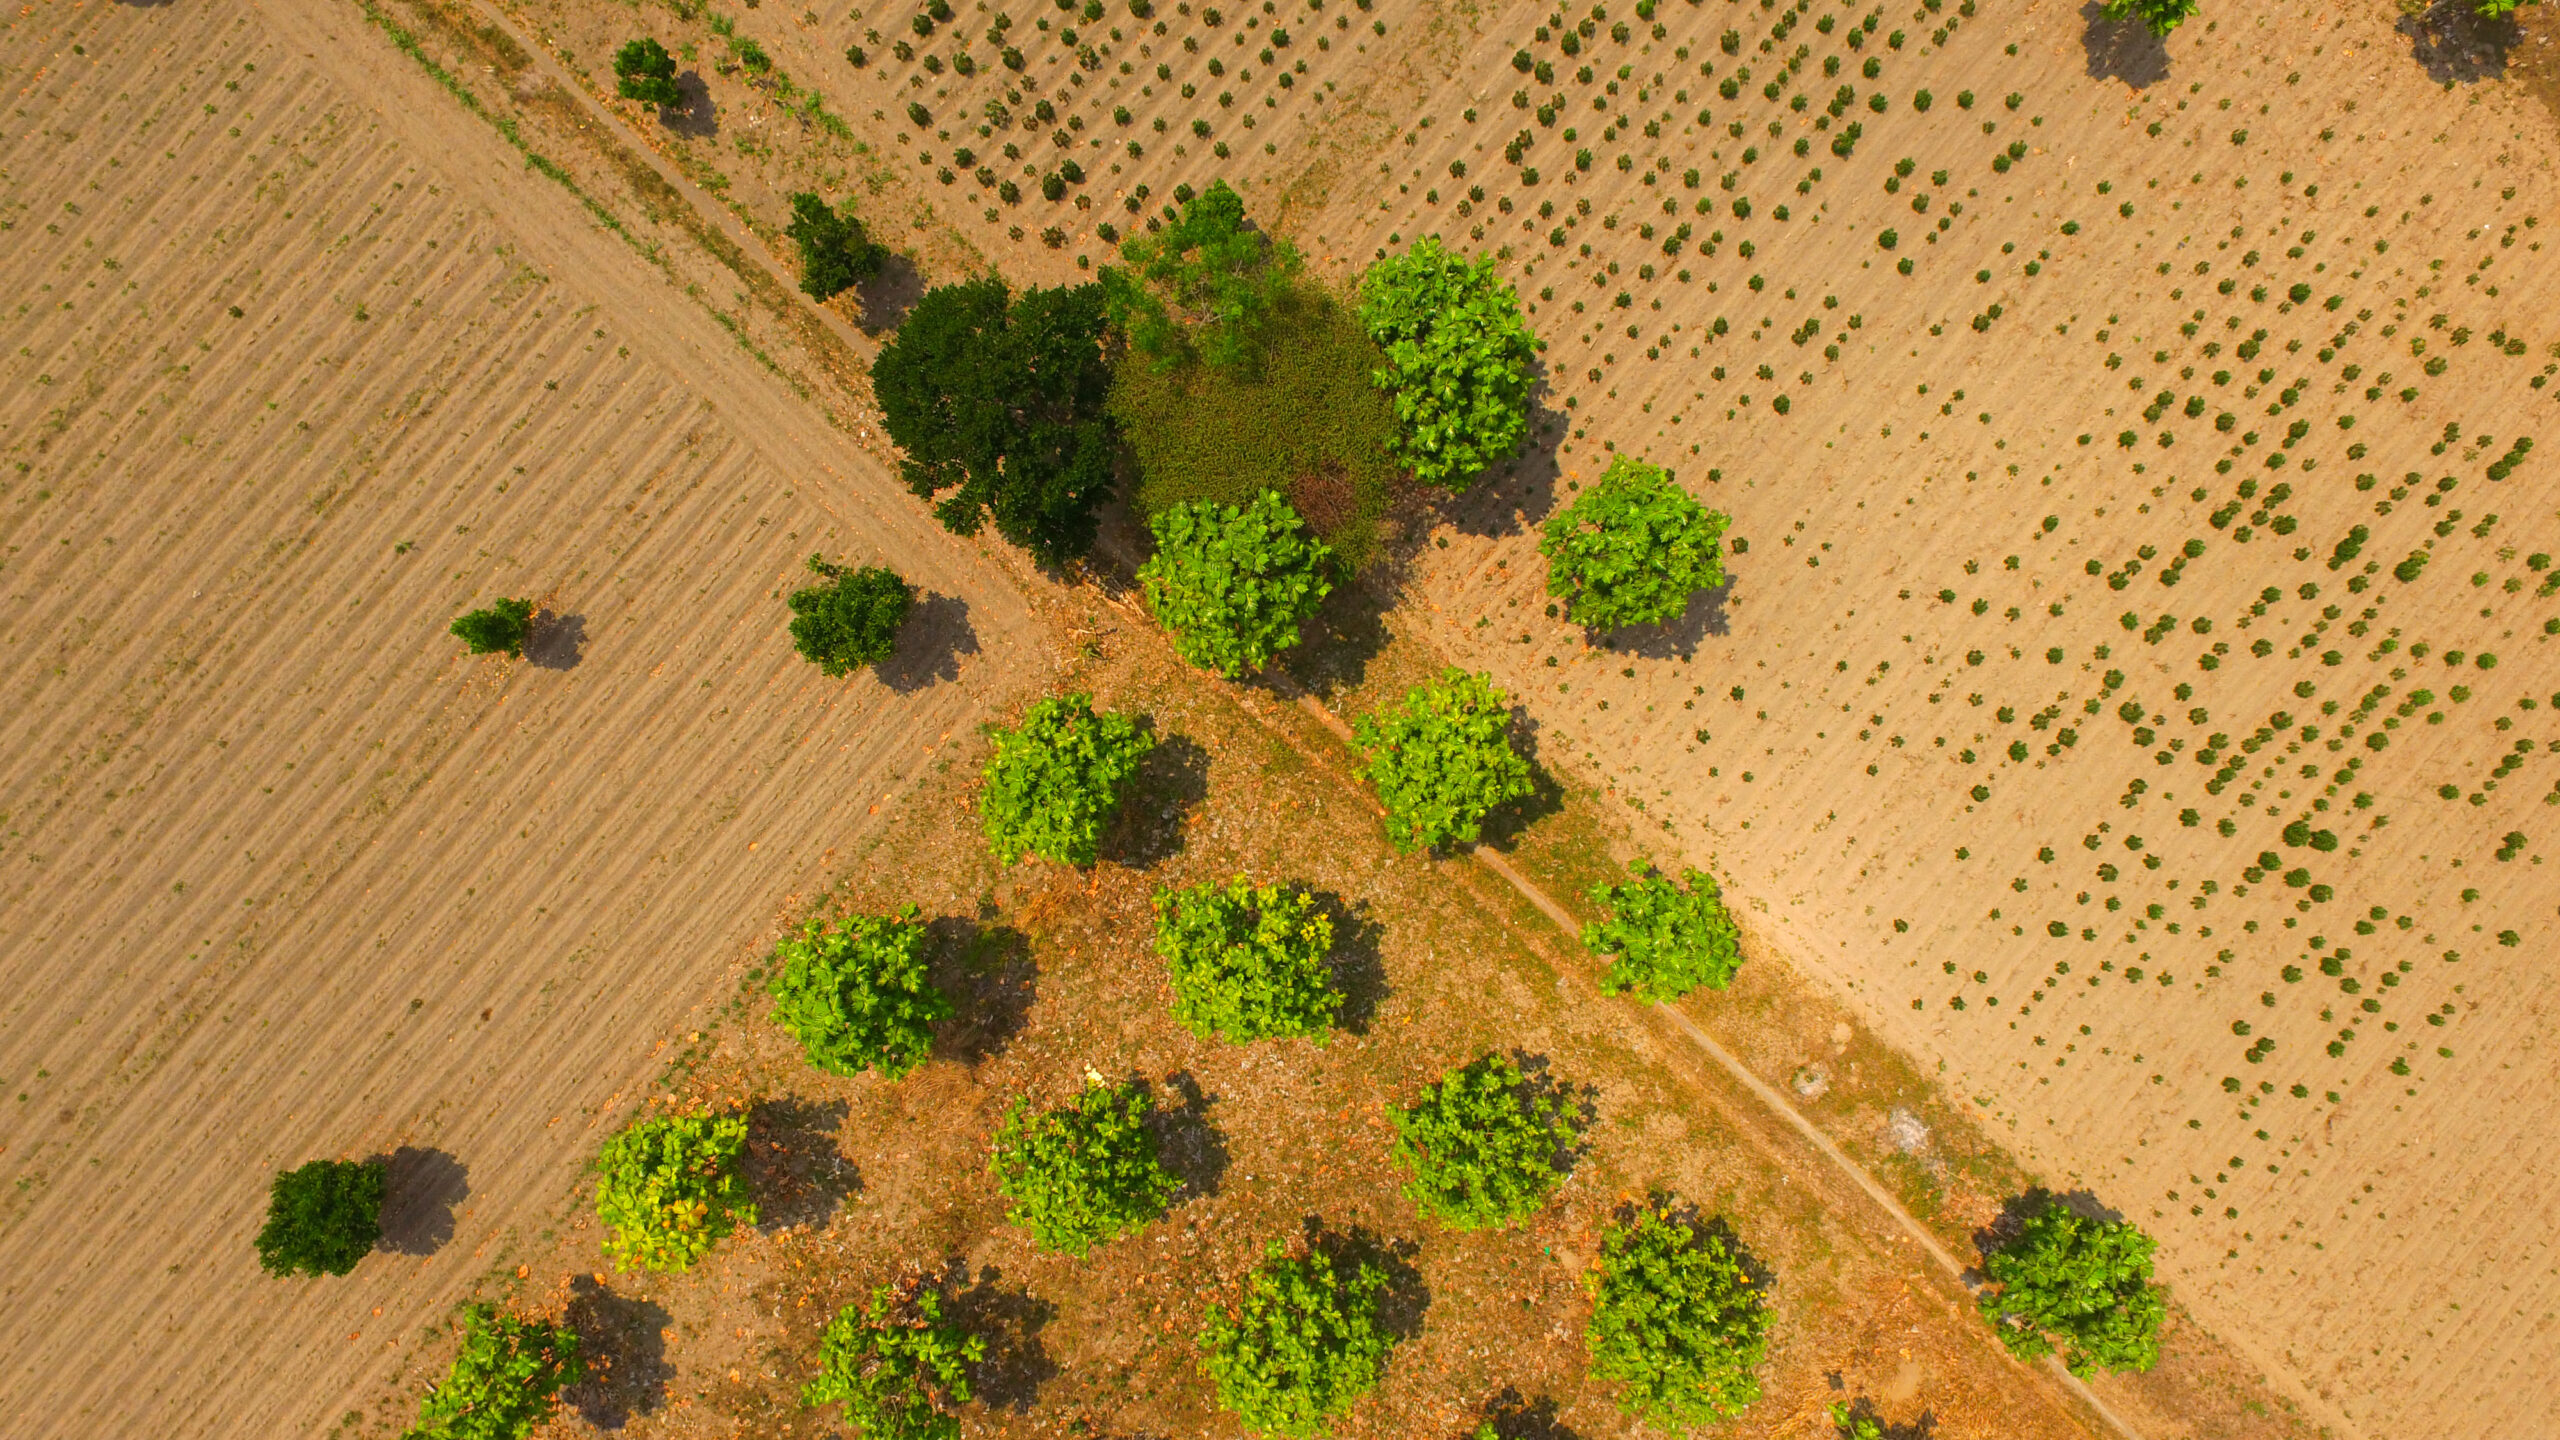 Aerial view of an agricultural field in the dry season showing spread out green trees and dry brown earth